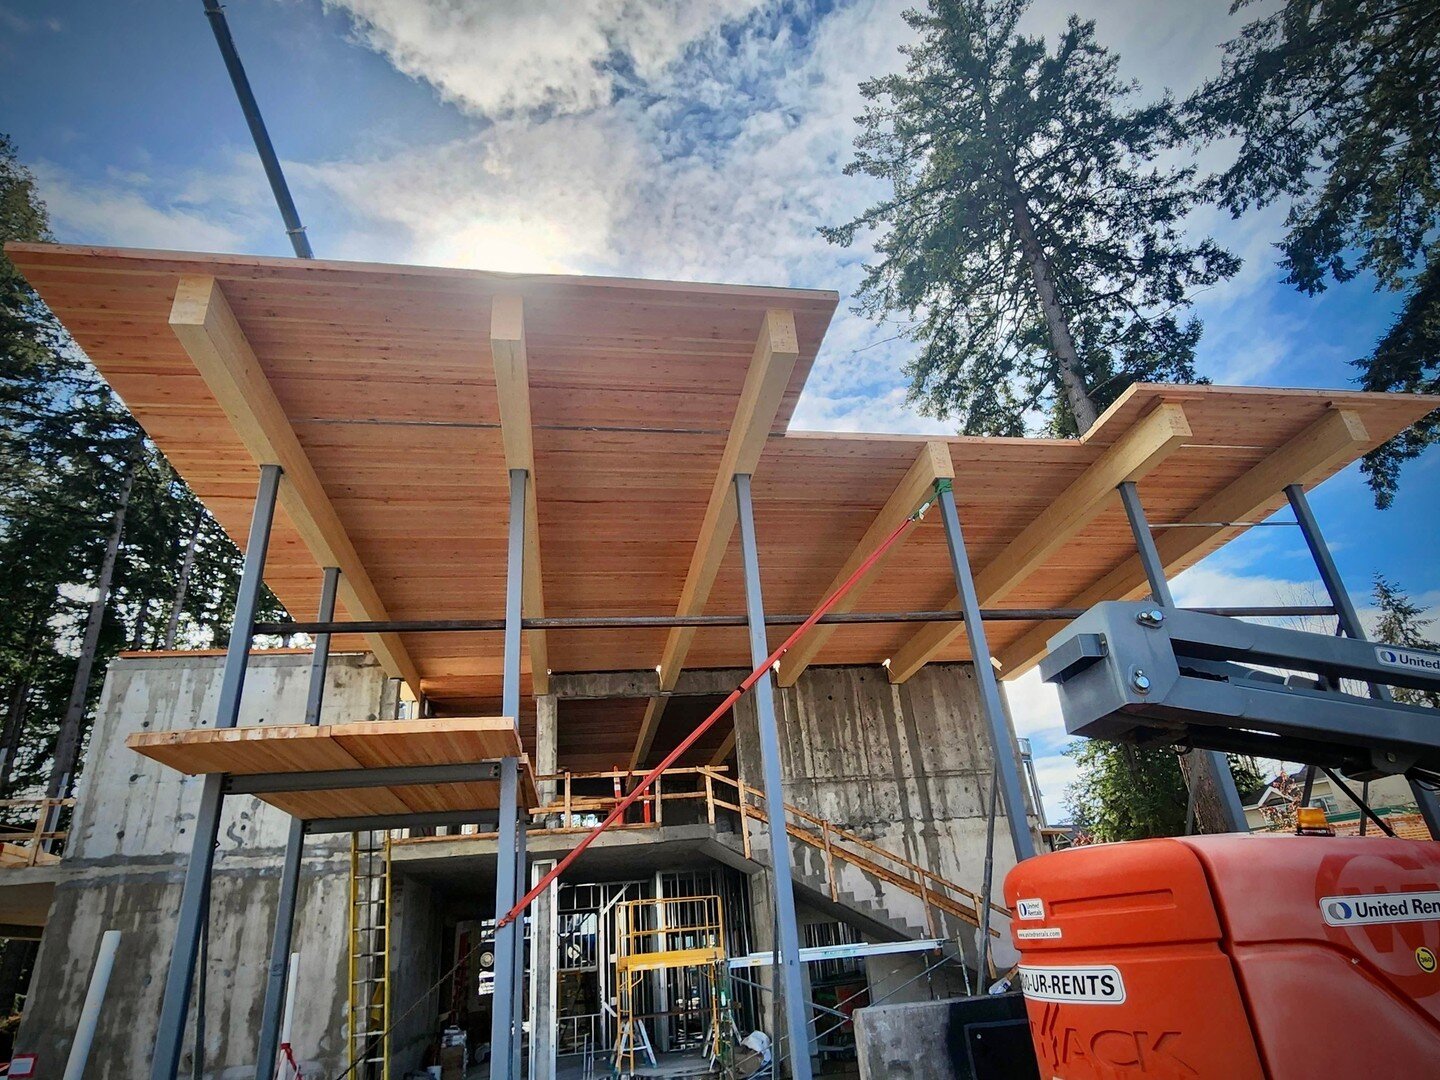 If these timbers could talk we think they would say...⁠
⁠
&quot;Dang, we look GOOOD.&quot; 😎⁠
⁠
And, frankly, they're not wrong. An eagle flew over head to check things out and we're pretty sure he also gave us a thumps up 😜⁠
⁠
Lelǝm̓ Community Cen